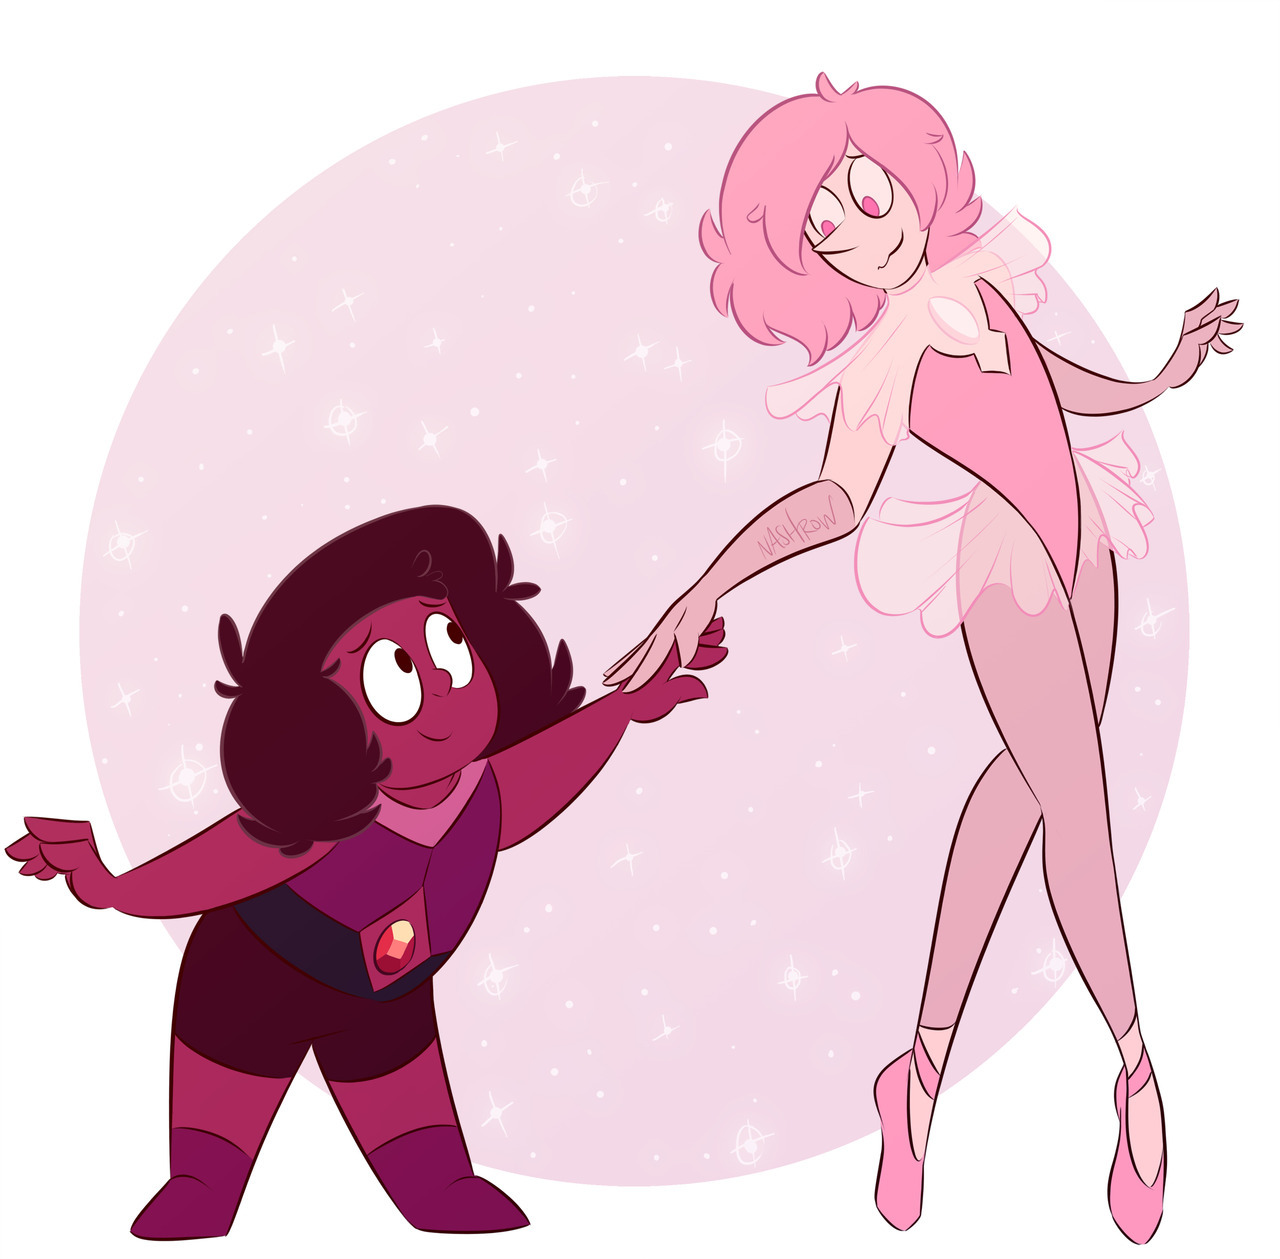 “A Ruby and a Pearl? That must’ve been a story.”